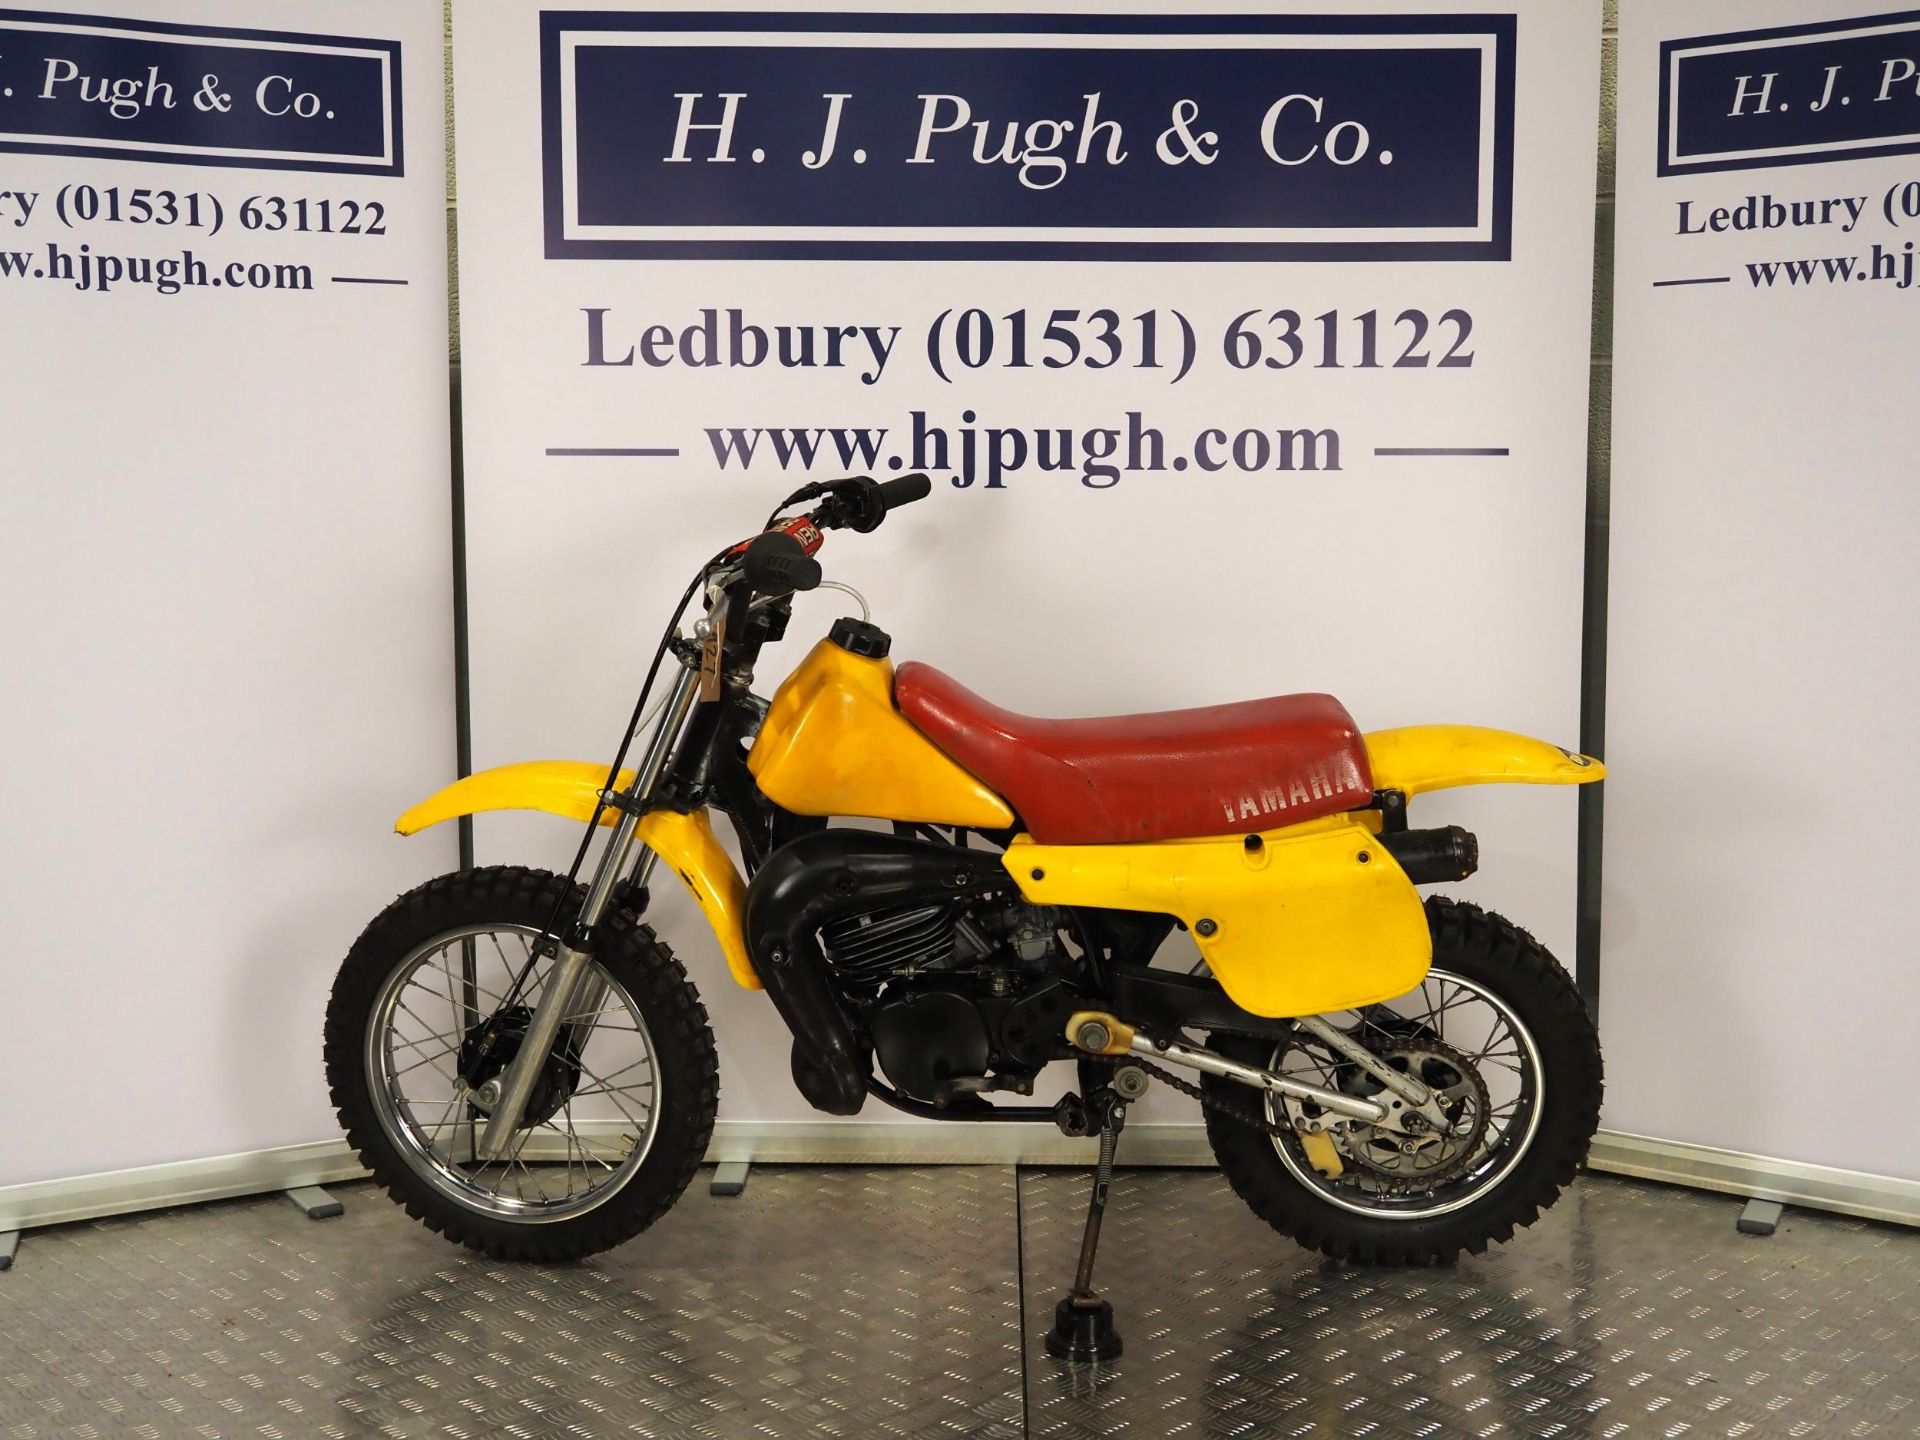 Yamaha YZ60 childs scrambler. 1982. Engine No. 5X1-000786 Engine turns over but has not been - Image 5 of 5